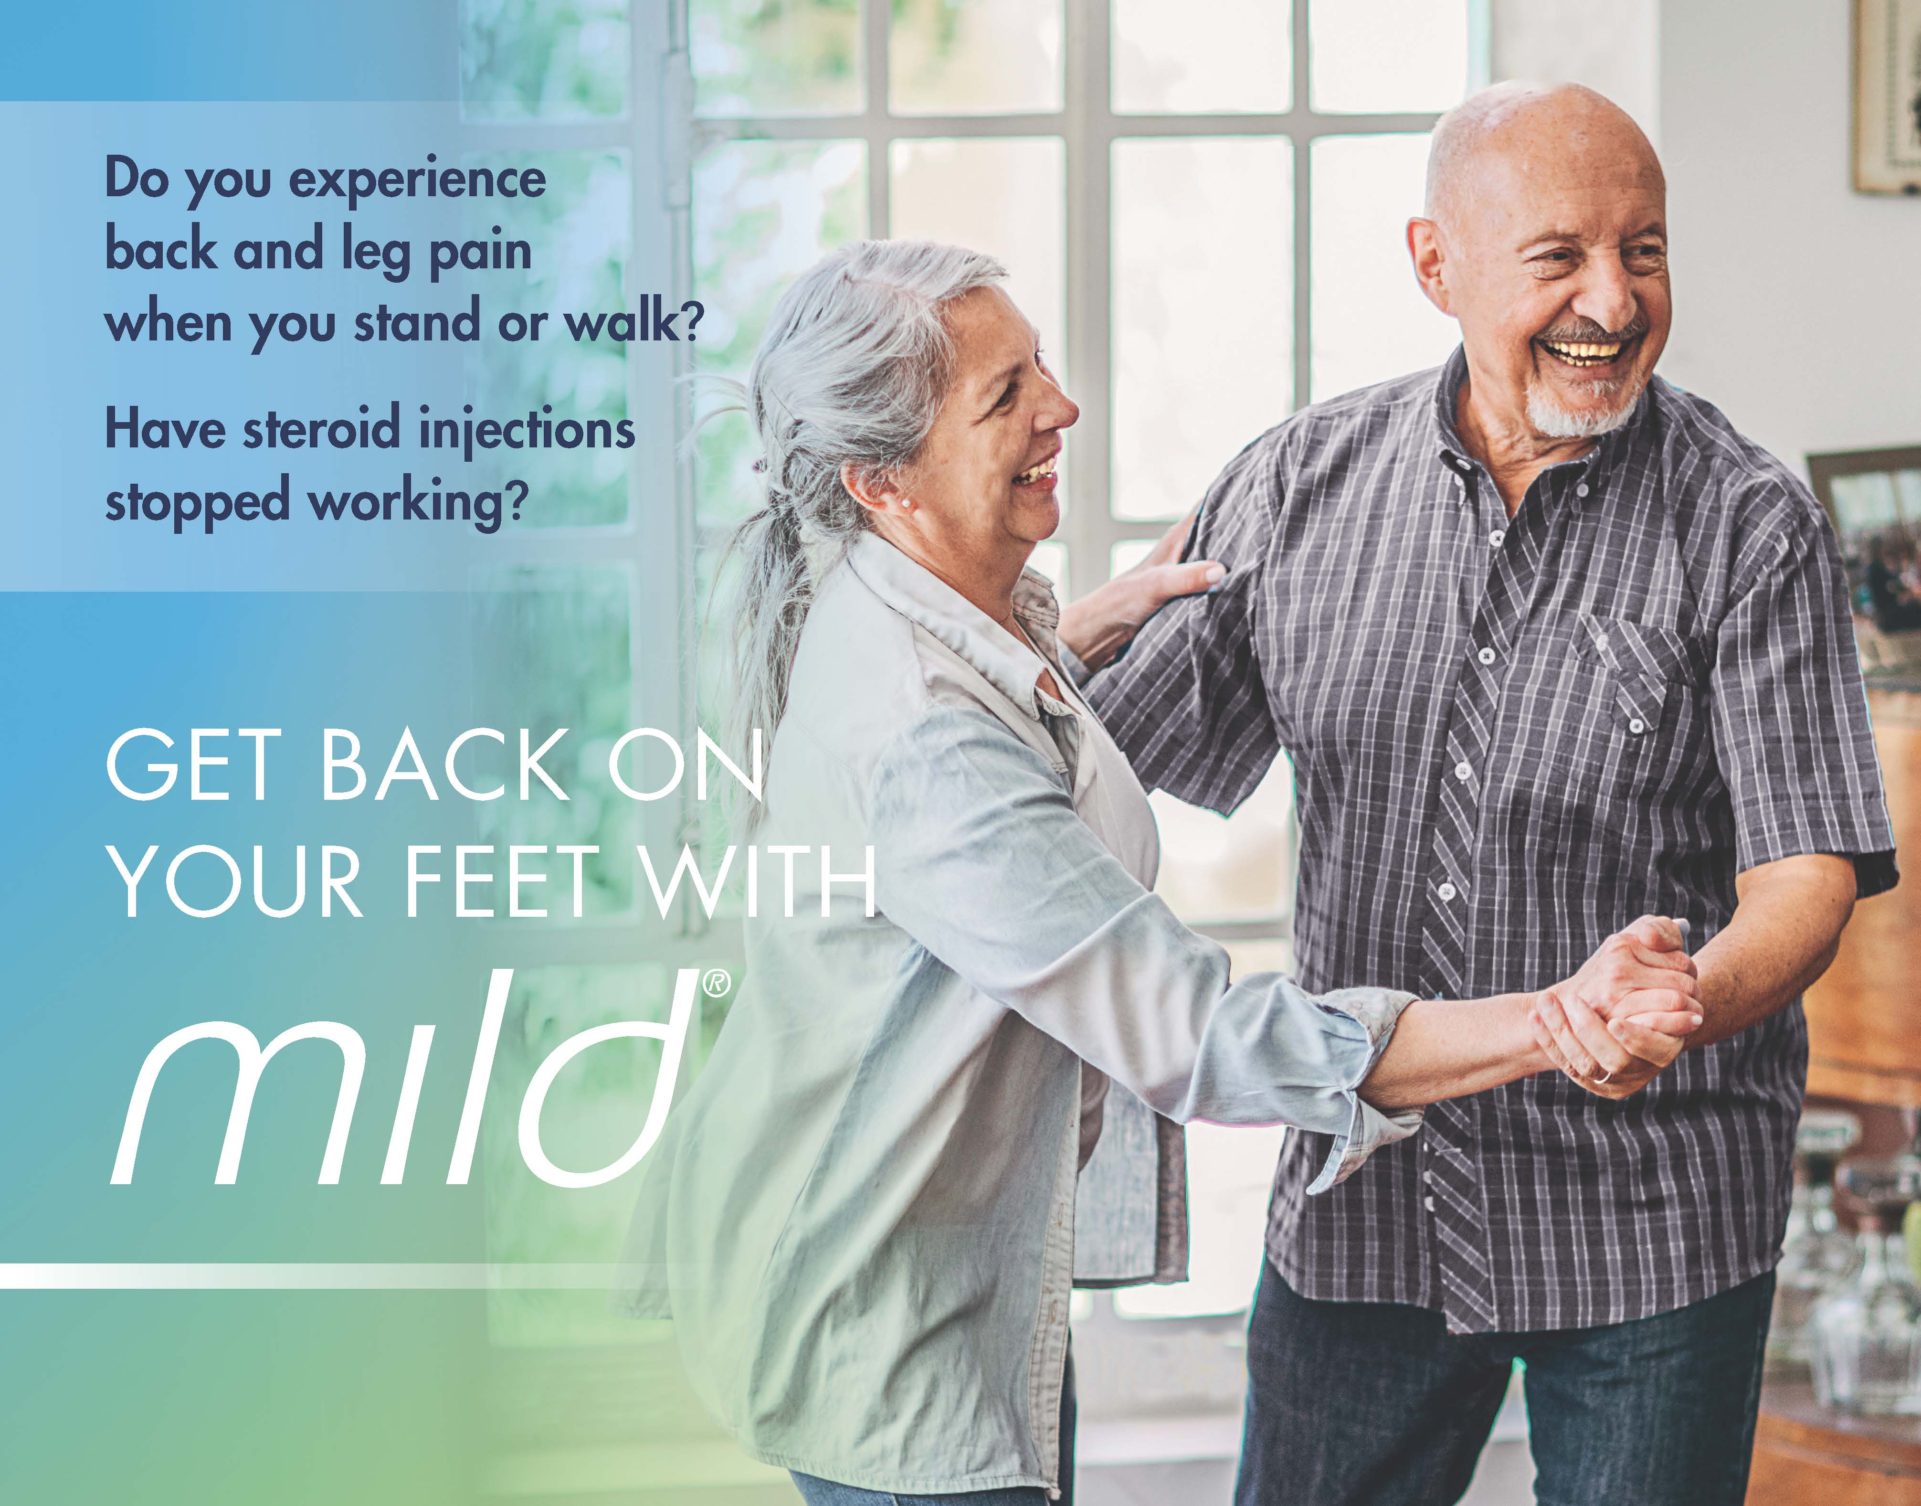 Do you experience back and leg pain when you stand or walk? Have steroid injections stopped working? Get back on your feet with the mild® procedure 